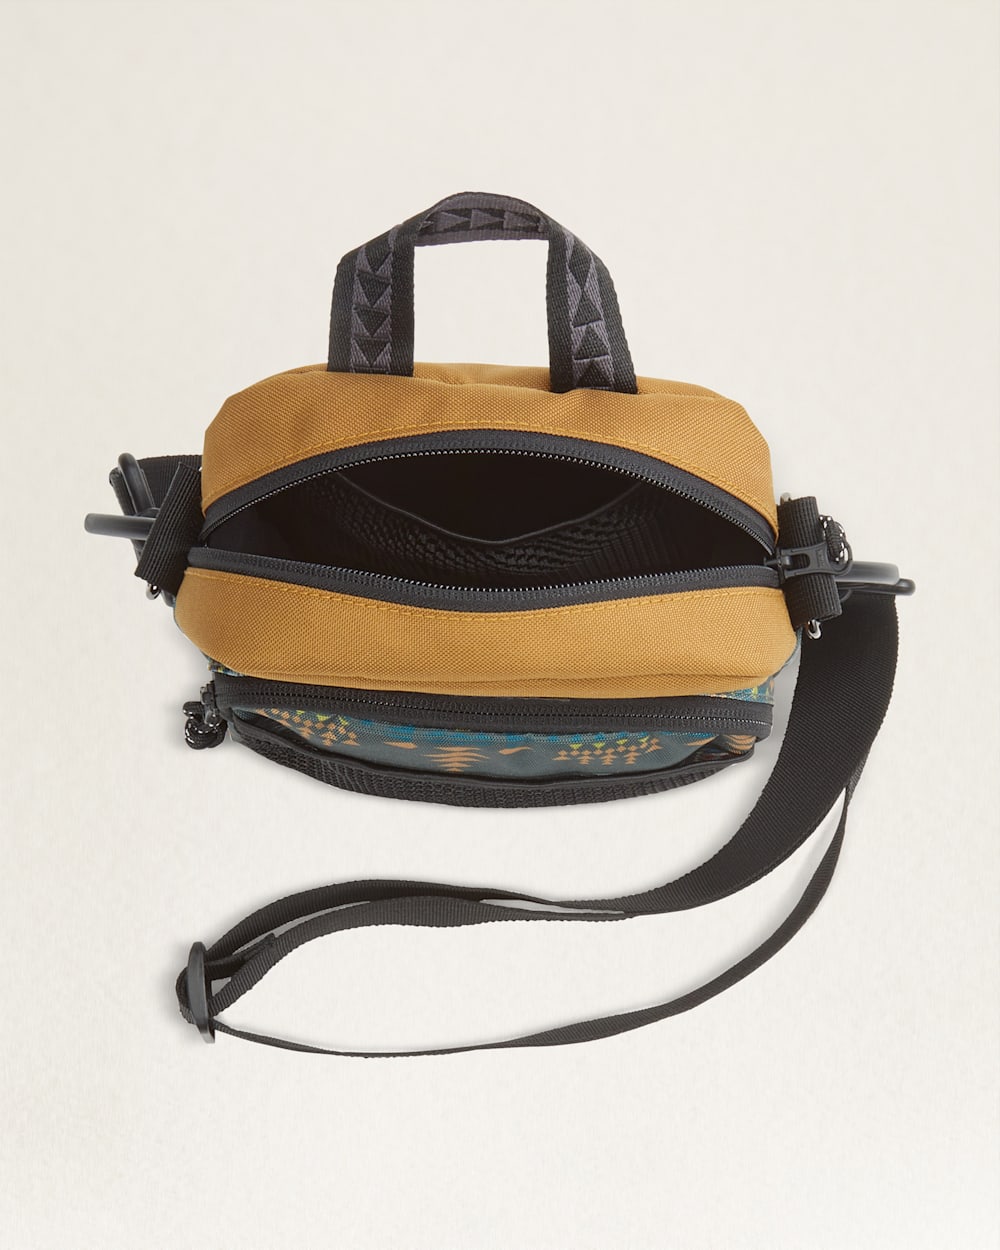 ALTERNATE VIEW OF RANCHO ARROYO EXPLORER CROSSBODY IN OLIVE image number 3